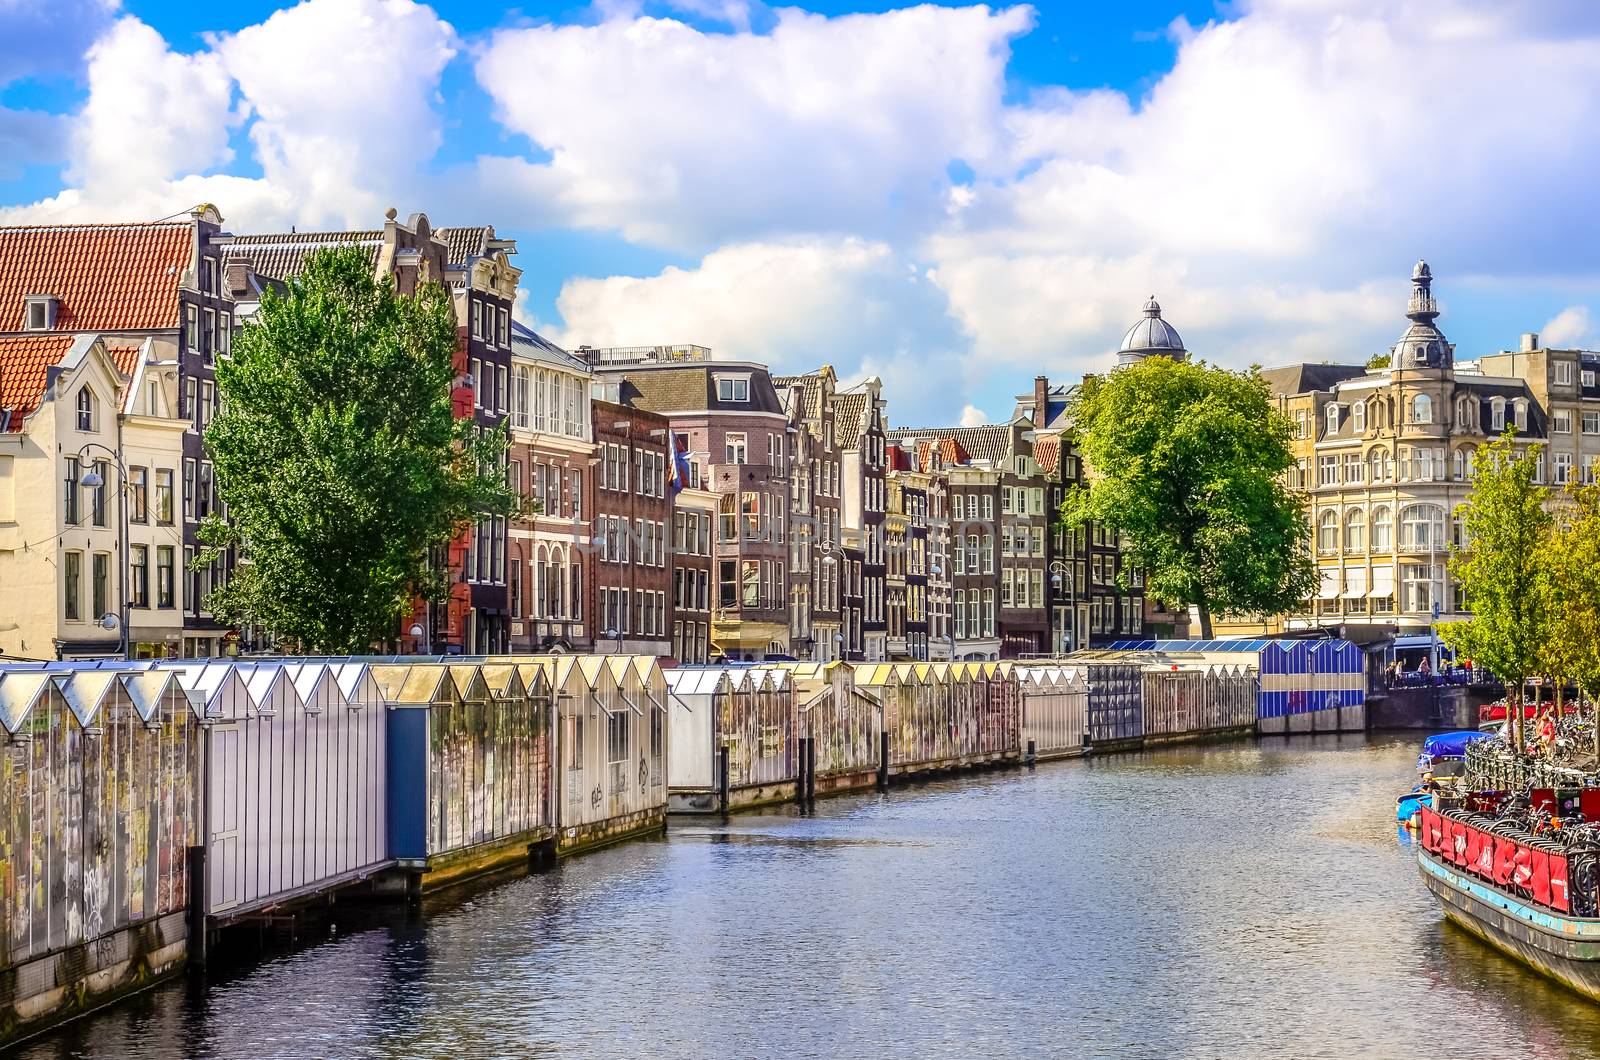 Scenic view of canal in Amsterdam at flower market, Netherlands